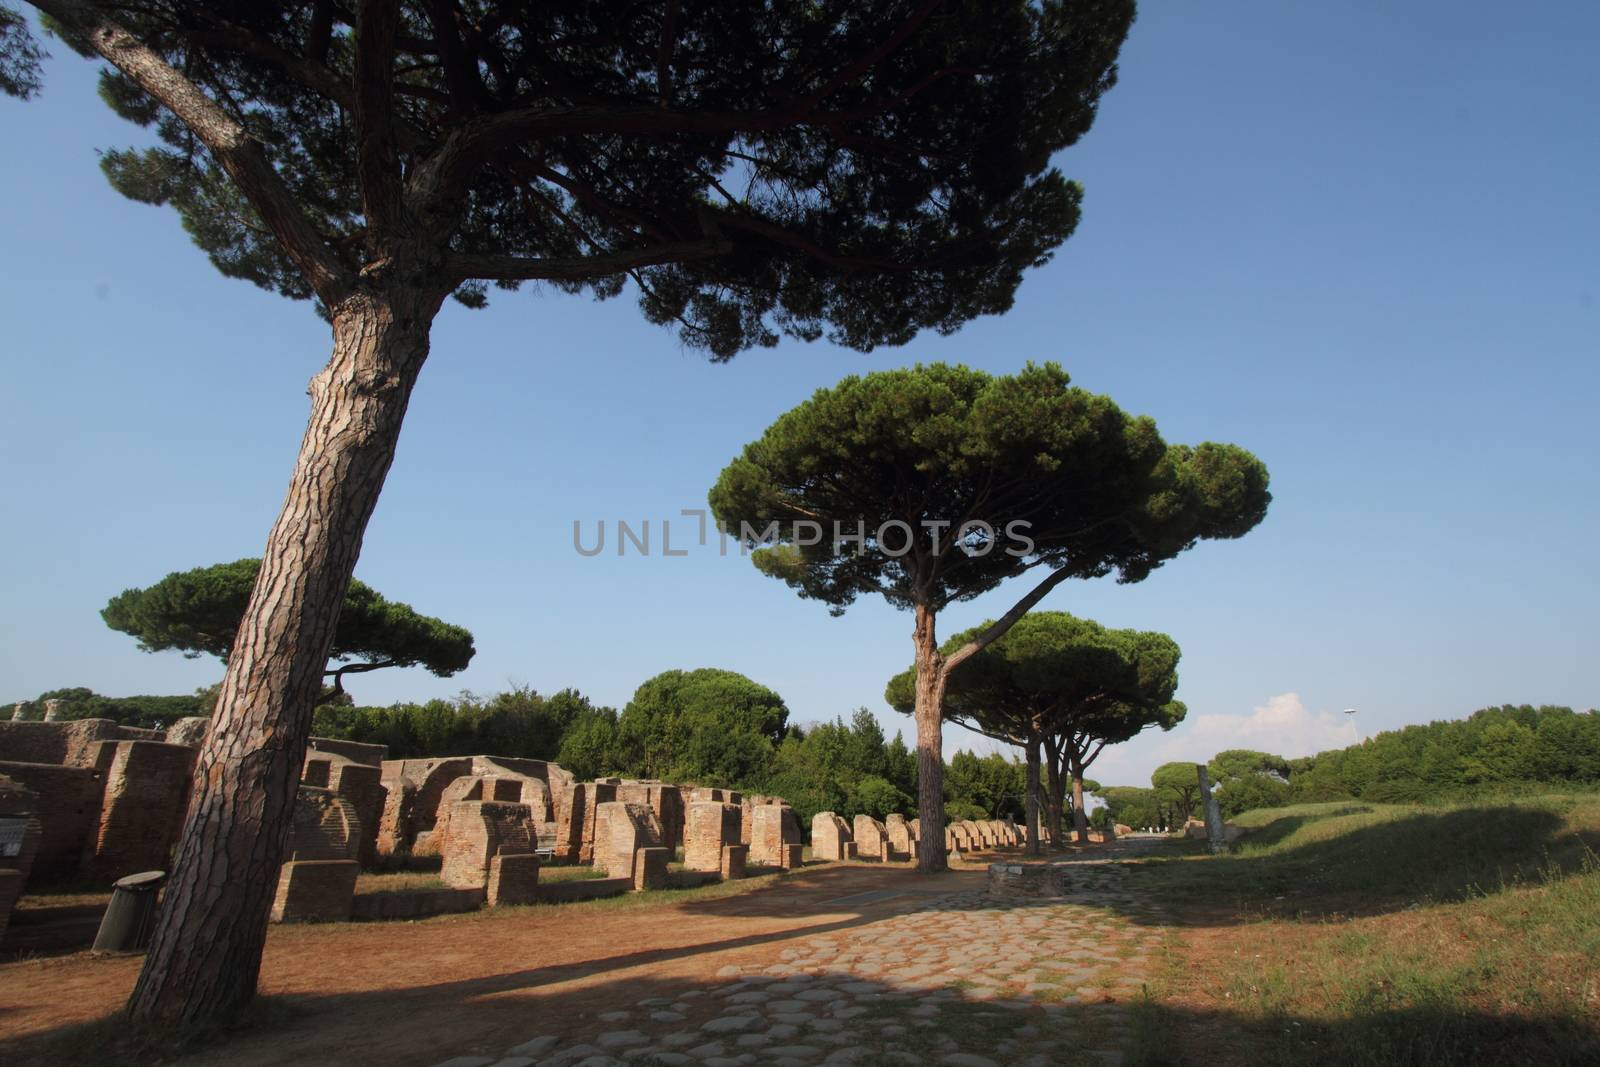 Rome, Italy - August 25, 2019: The archaeological site of Ostia Antica